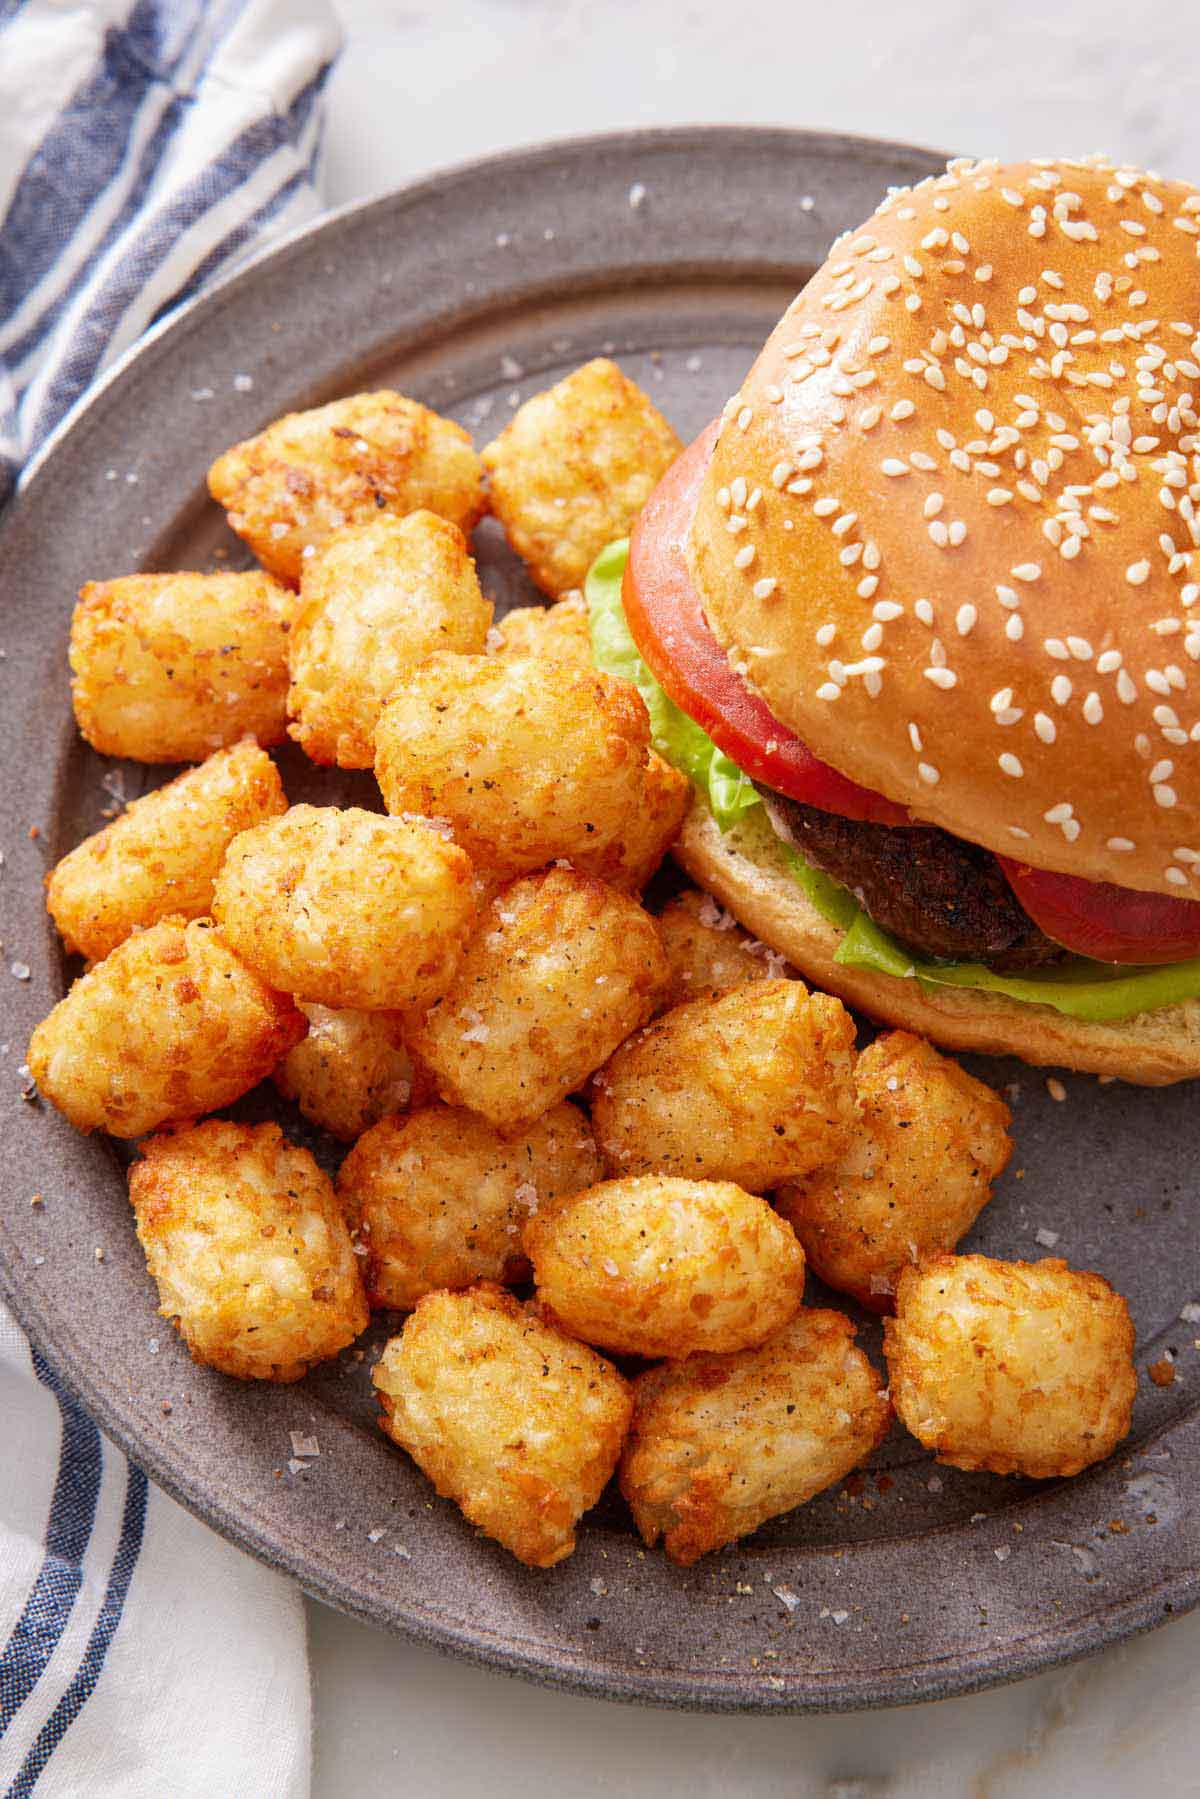 Overhead view of a plate of air fryer tater tots beside a hamburger.